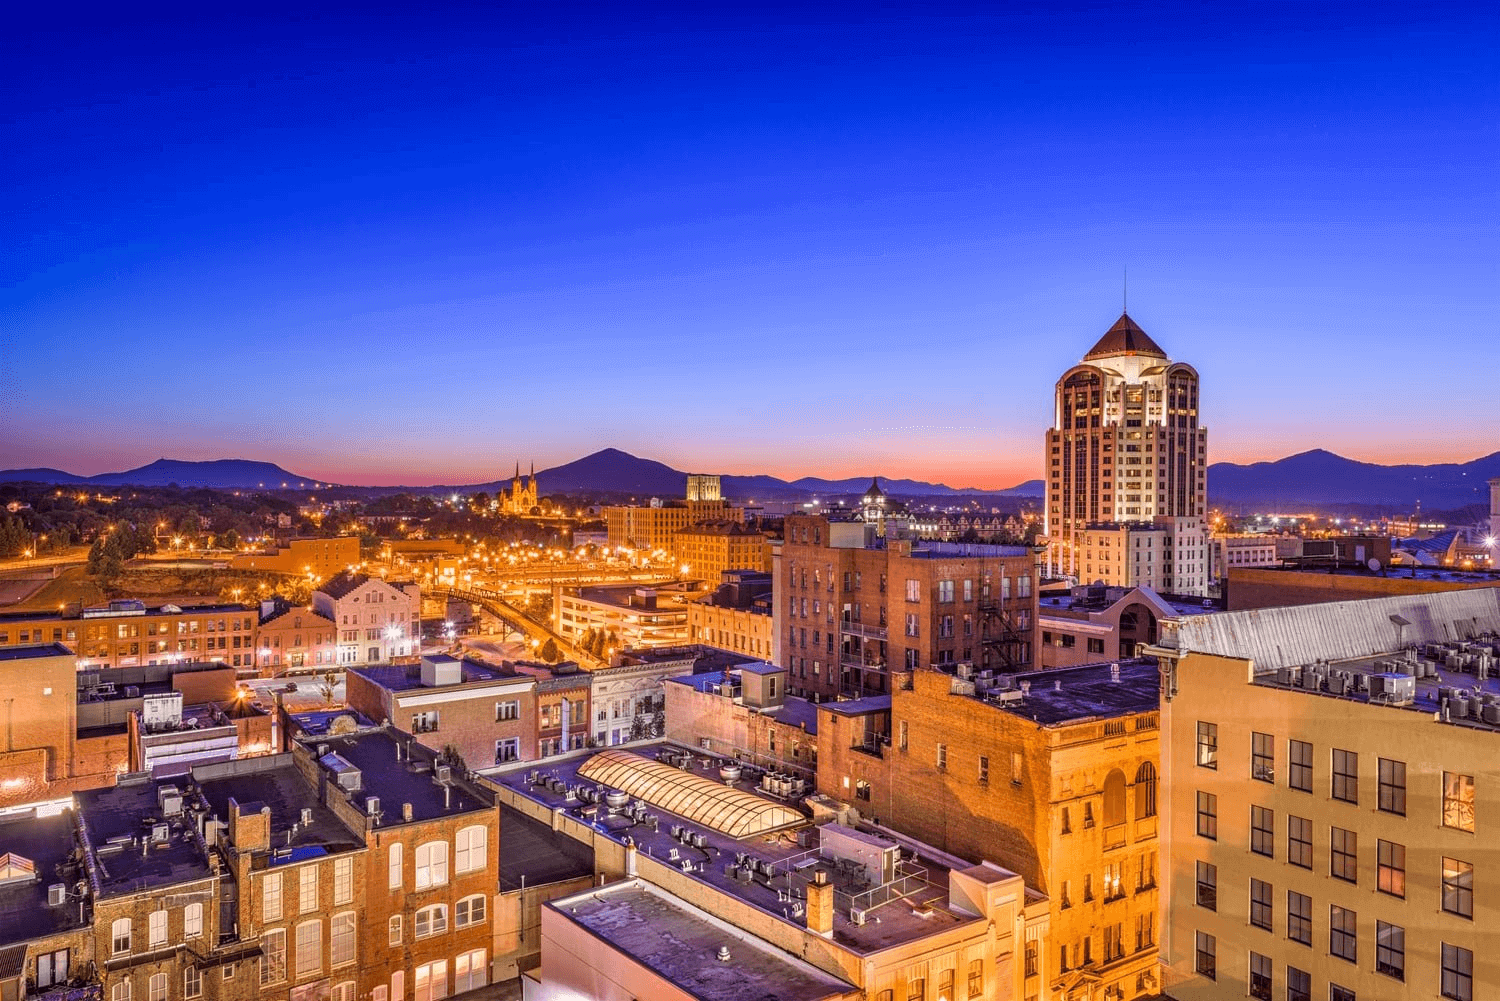 Downtown Roanoke at sunset